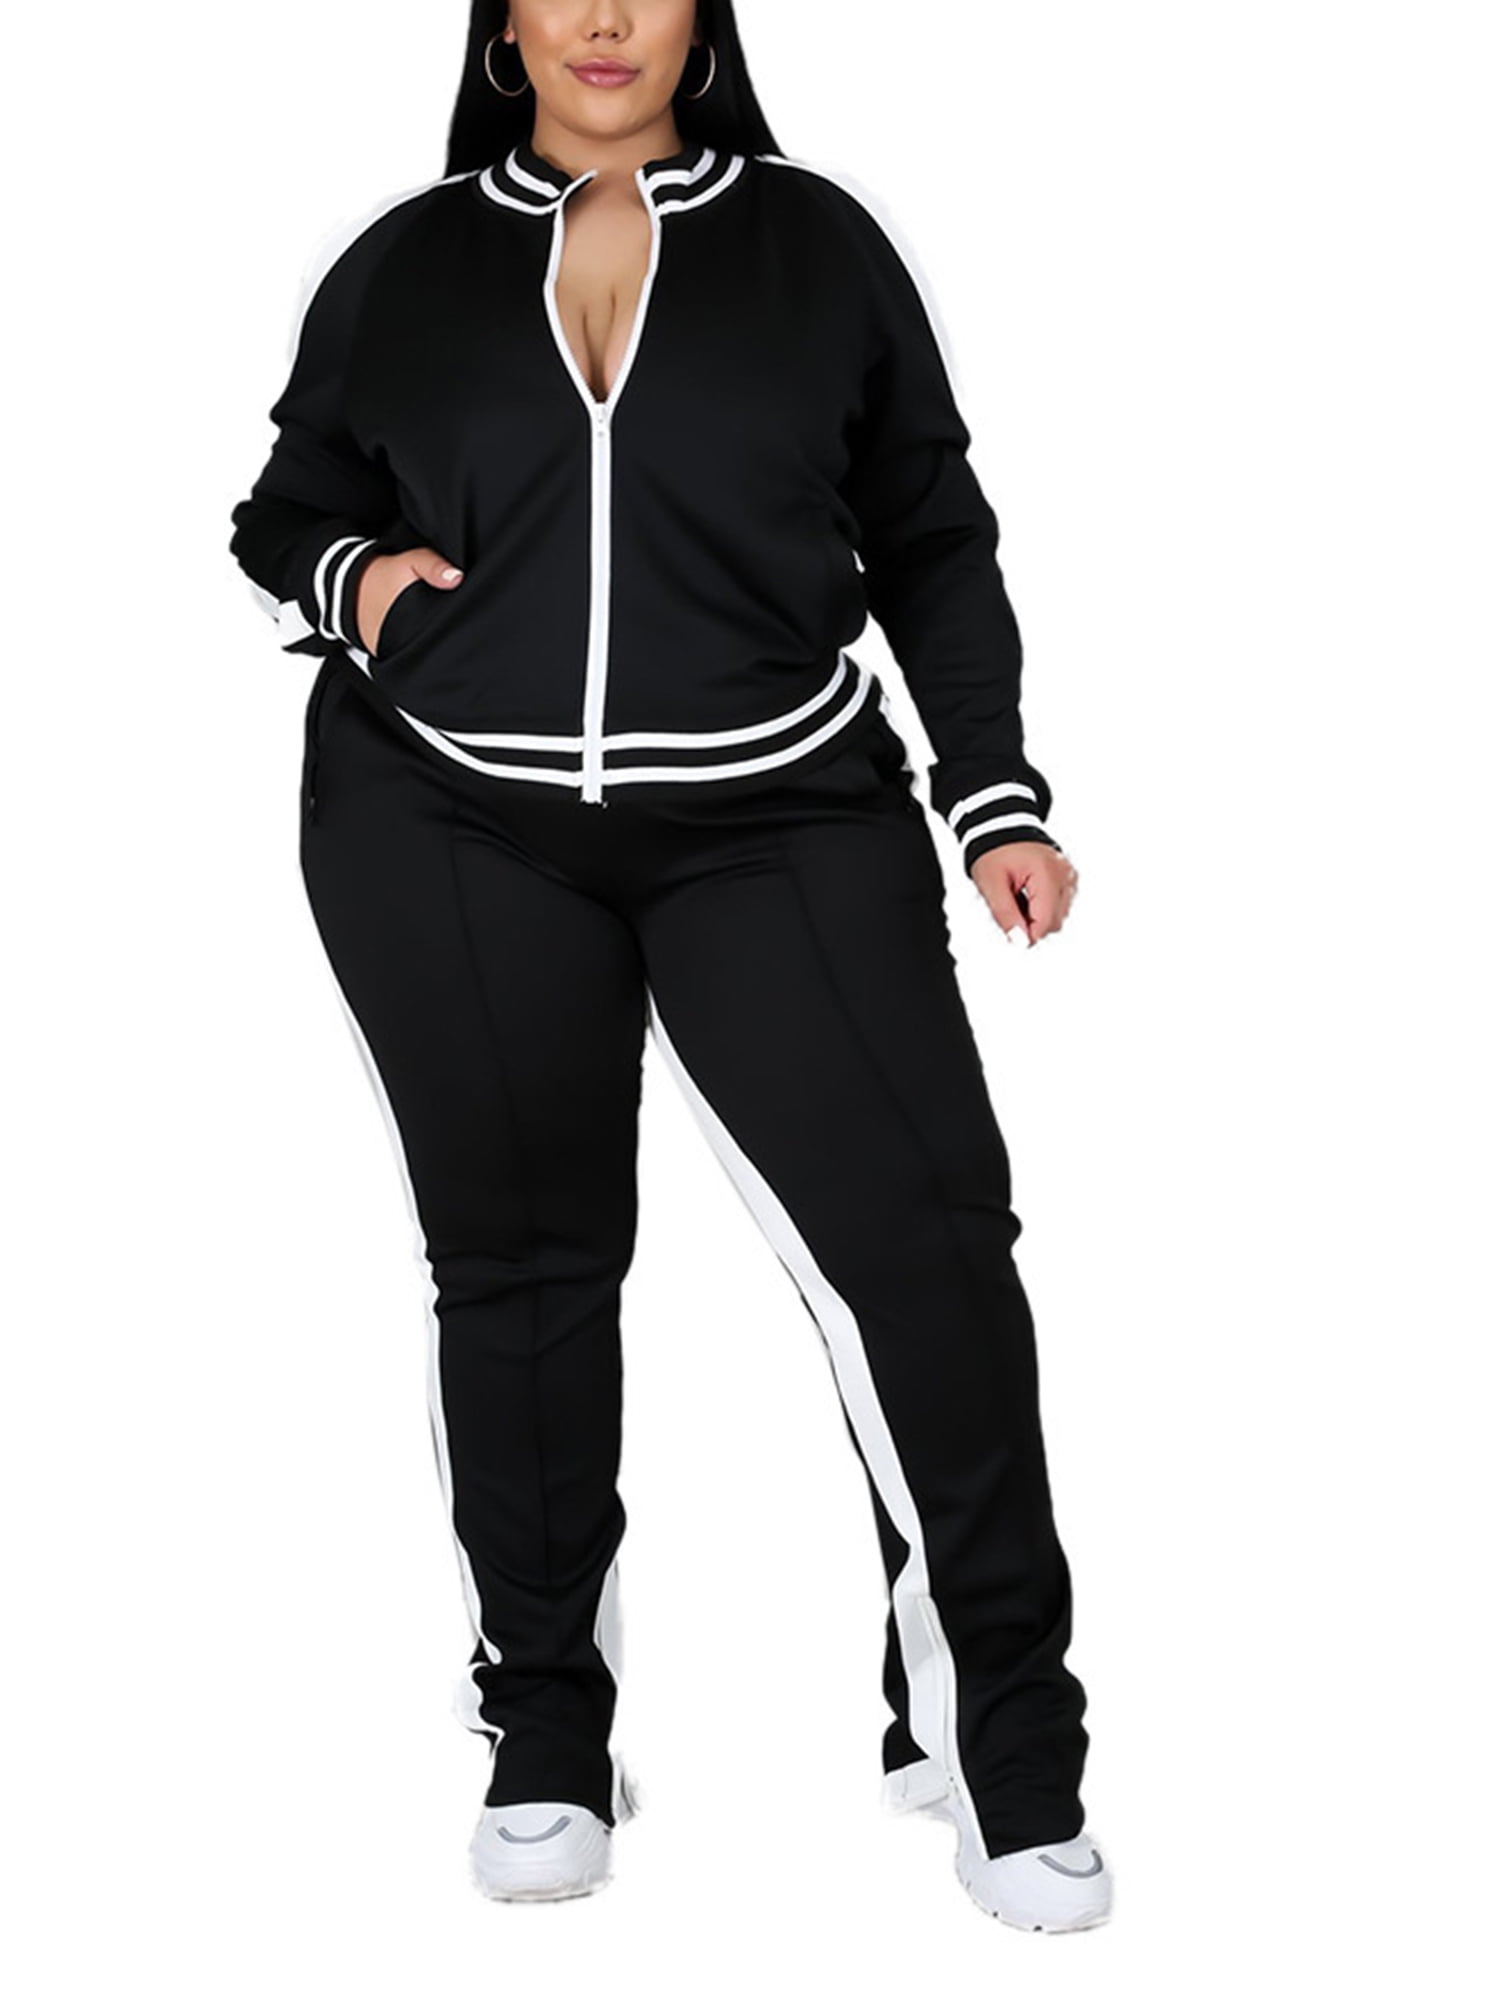 Lw Plus Size Hooded Collar Patchwork Tracksuit Set Women Fall Clothes  Sweatsuit Joggers Outfit Zip Top Sweatpants Tracksuit - Plus Size Sets -  AliExpress